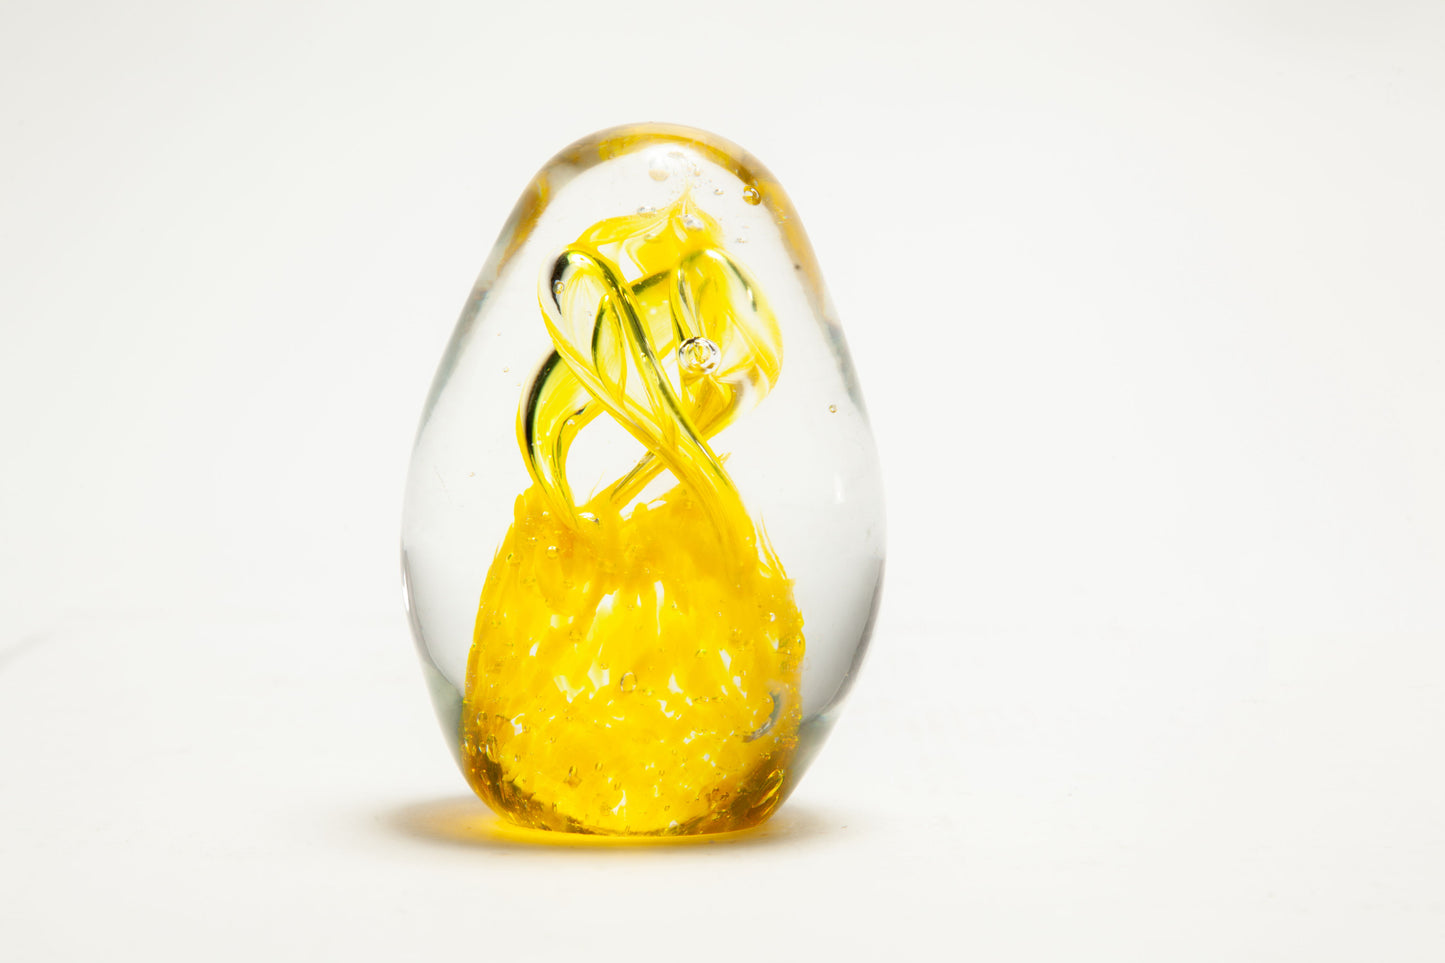 Murano glass paperweight with yellow decoration